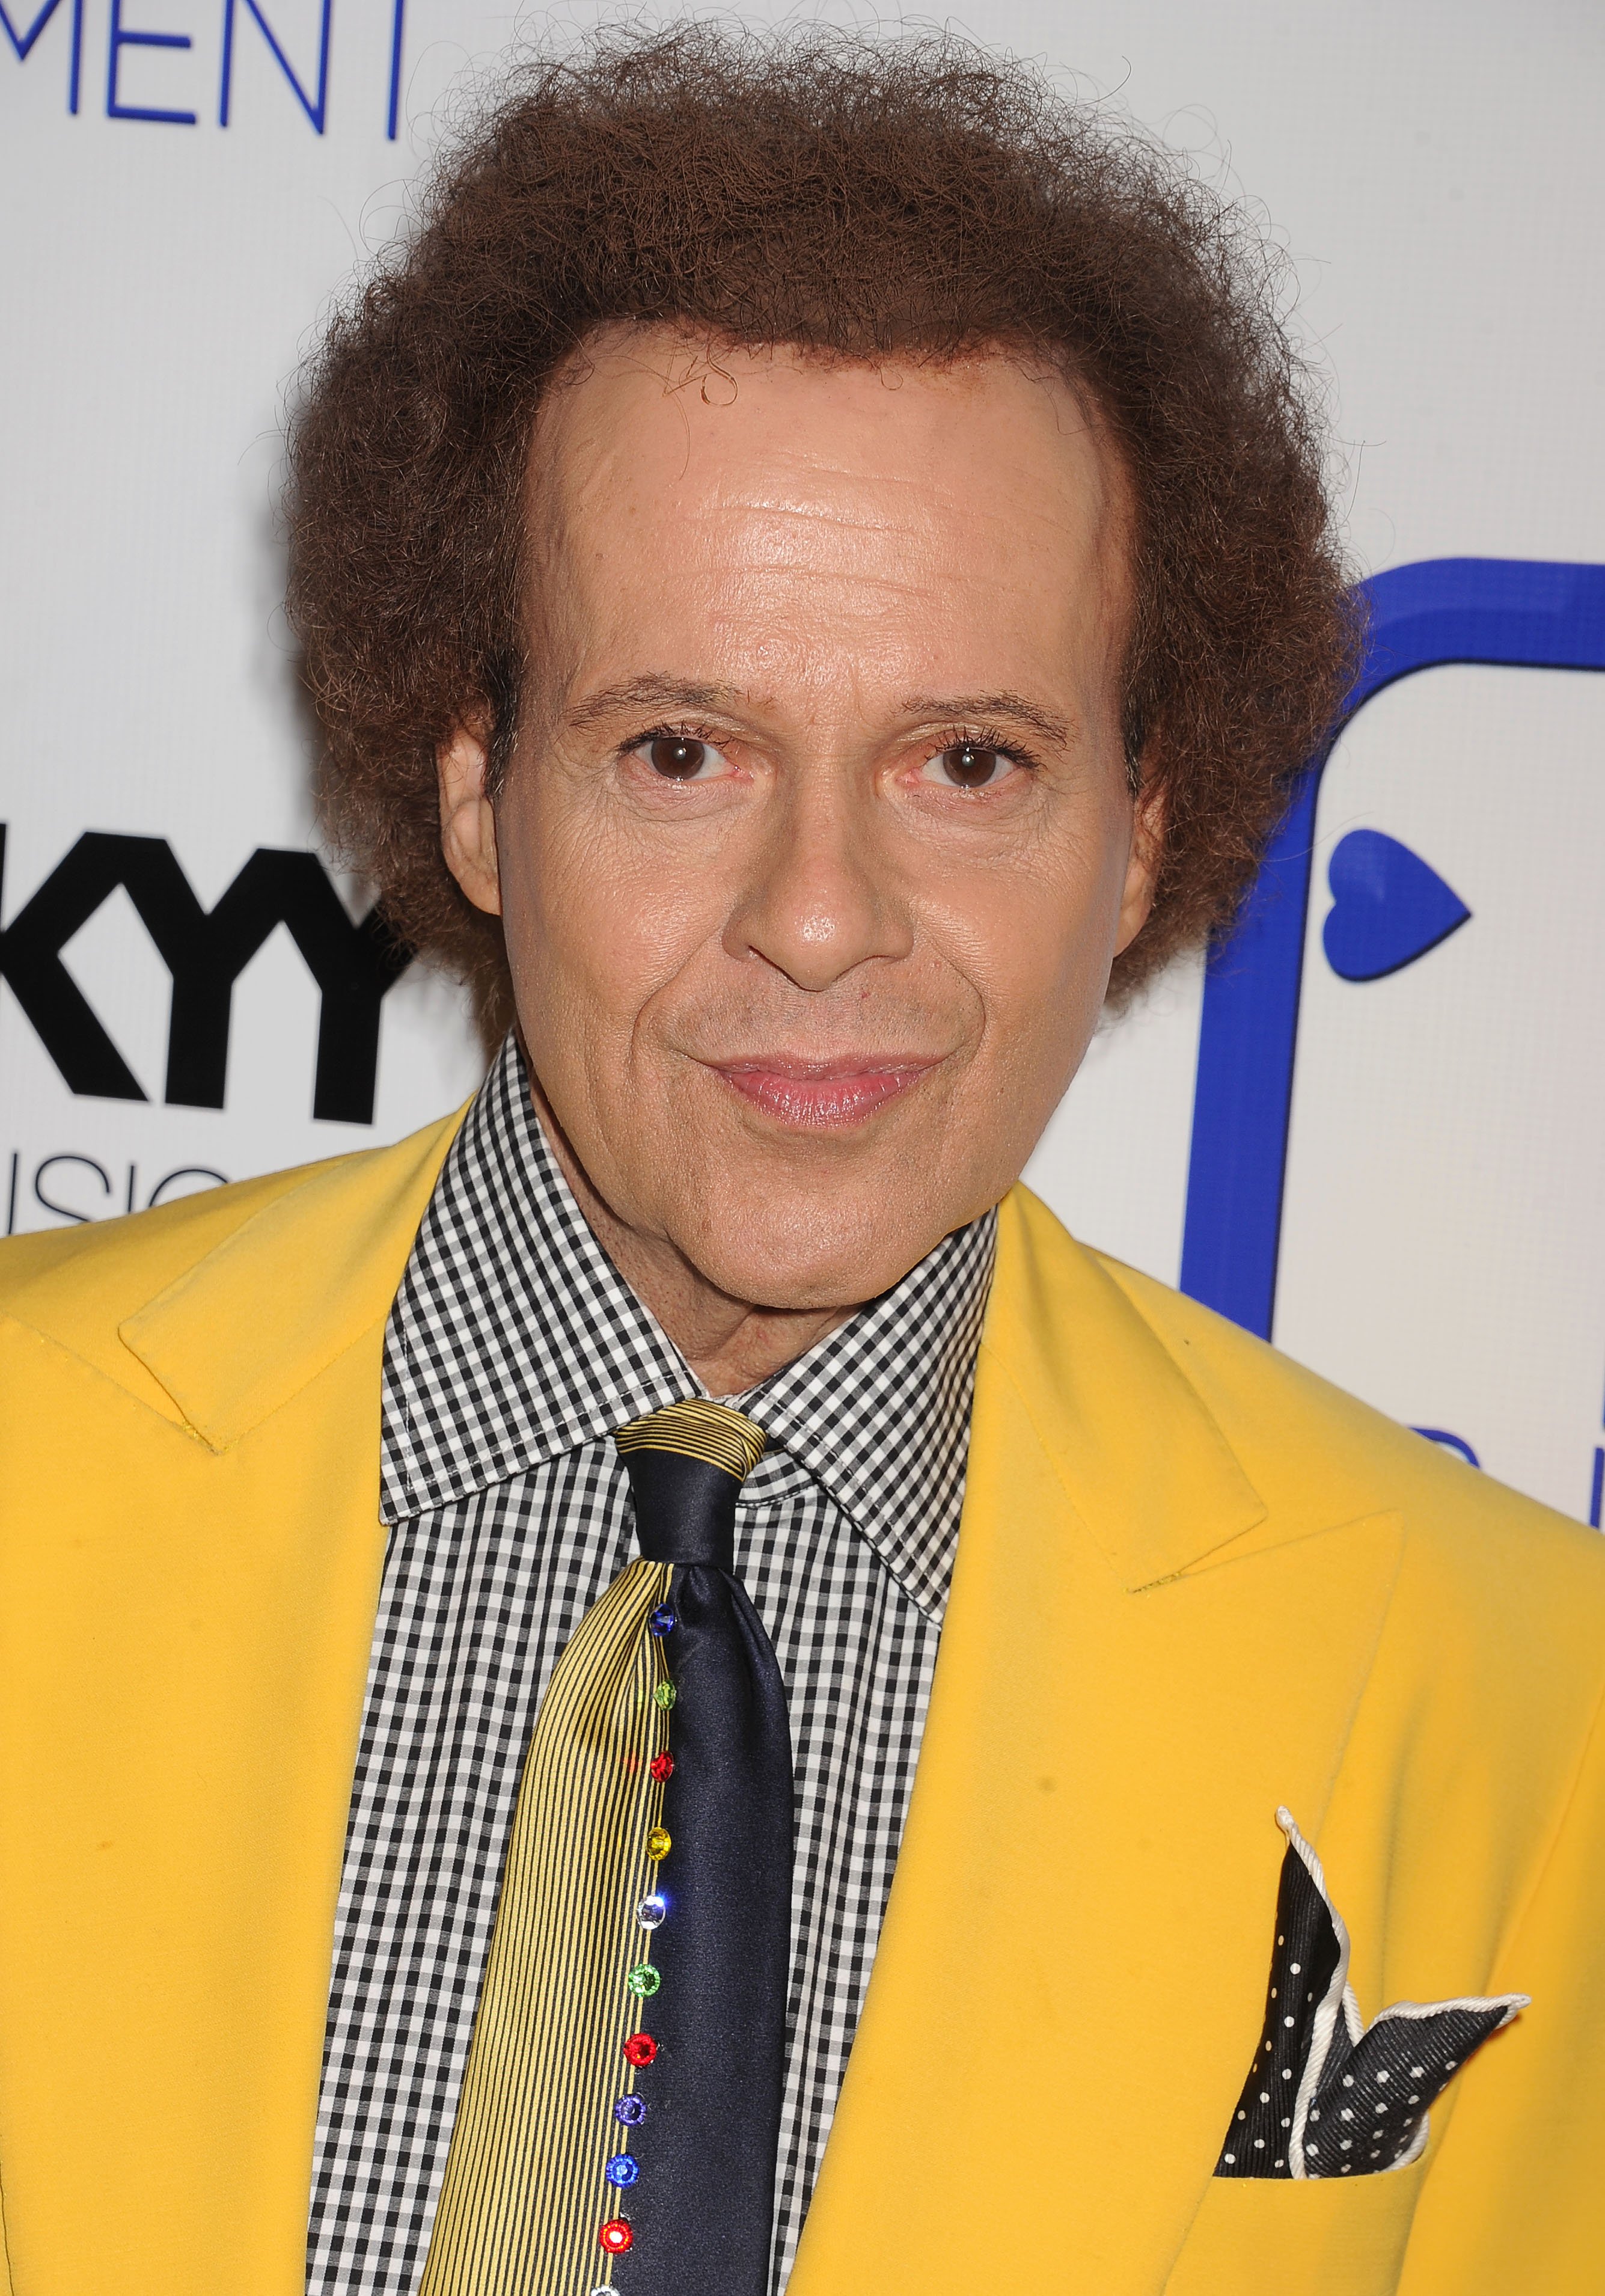 TV Personality Richard Simmons attends the Friend Movement Anti-Bullying Benefit Concert at the El Rey Theatre on July 1, 2013 in Los Angeles, California. | Source: Getty Images